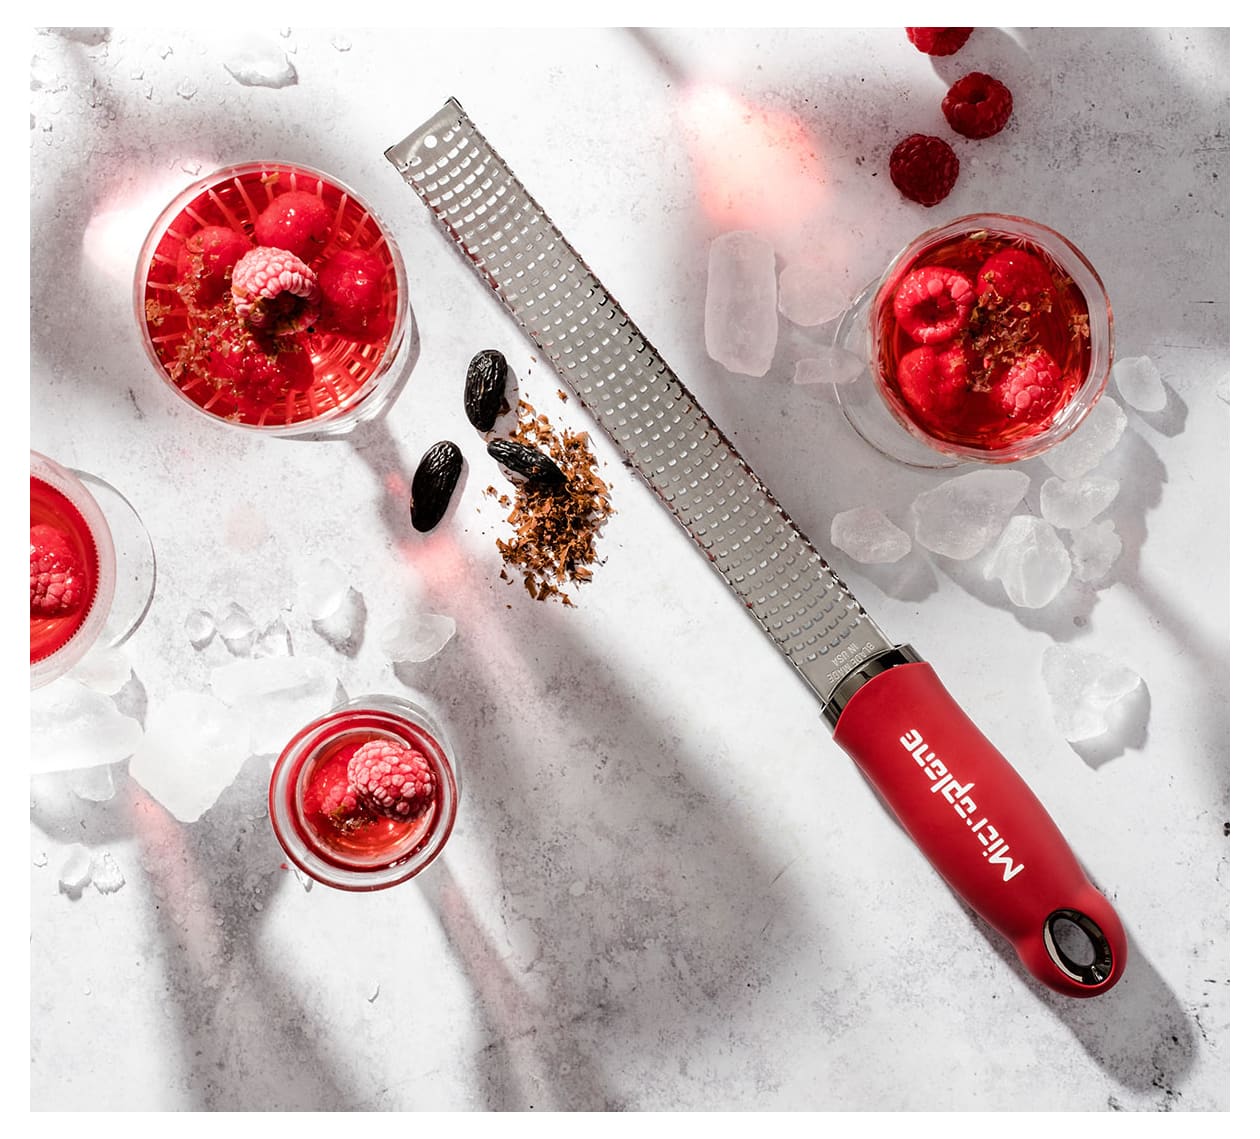 https://files.meilleurduchef.com/mdc/photo/product/mic/microplane-classic-zester-grater-pomegranate-red/microplane-classic-zester-grater-pomegranate-red-2-zoom.jpg